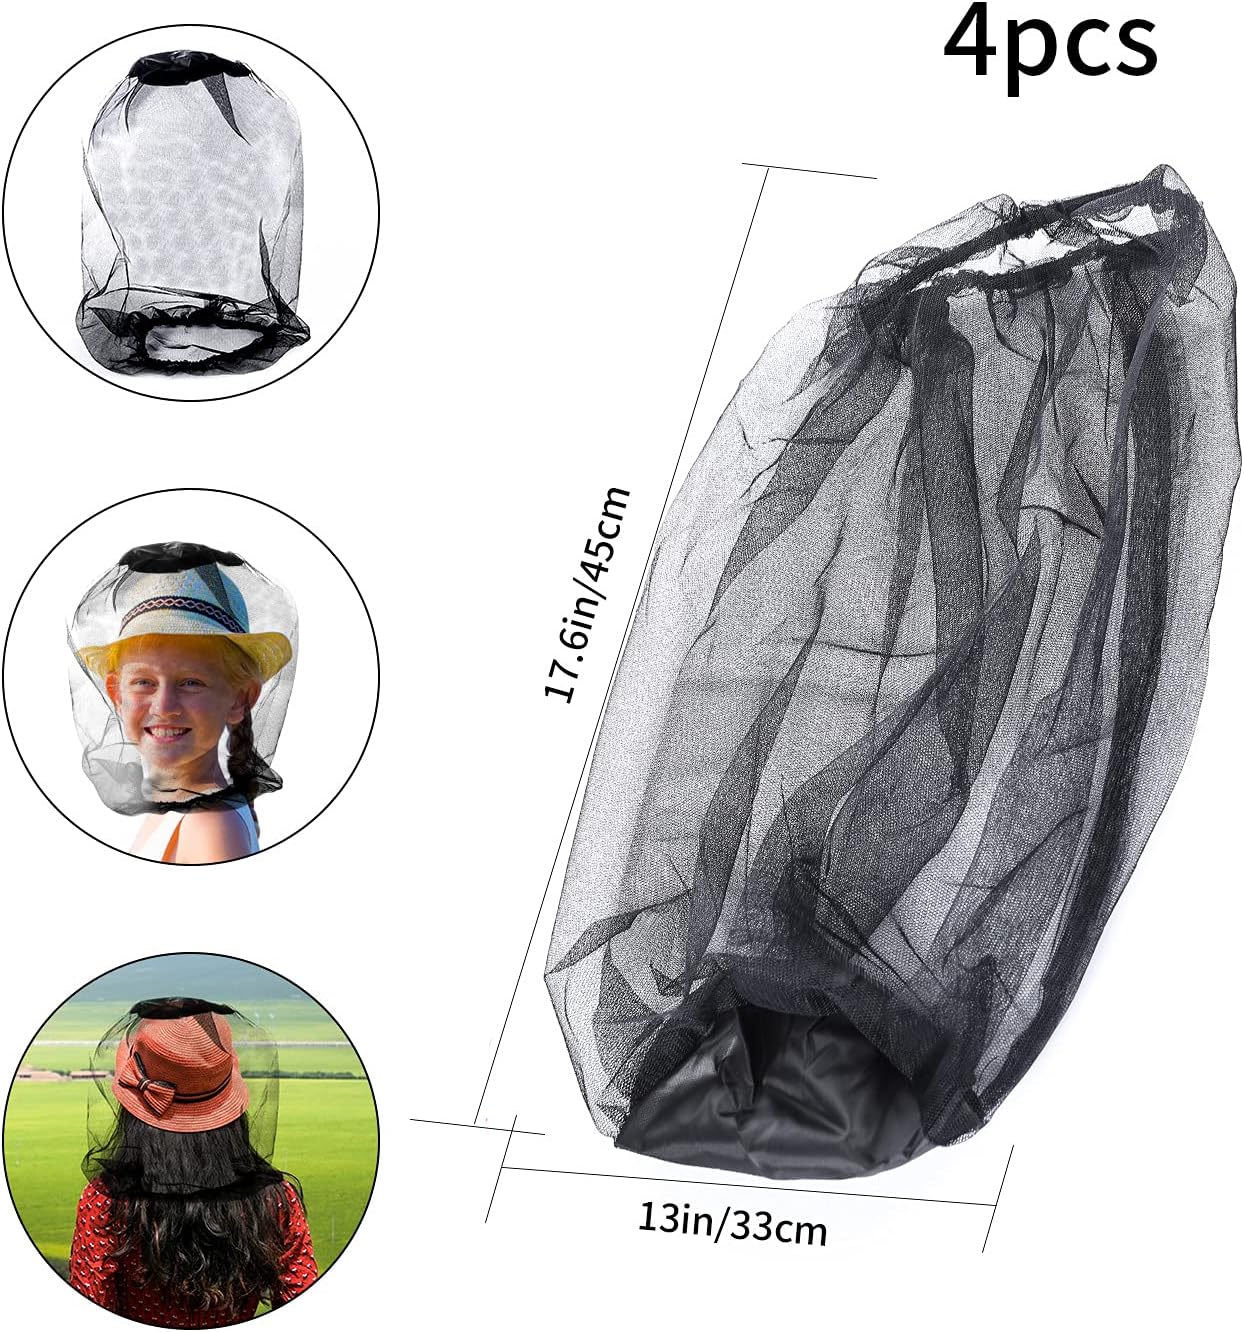 4 PCS Midge Head Net, Nylon Mosquito Head Protecting Net, Fine Mesh Insect Netting, Face Neck Netting Cover for Outdoor, Hiking, Camping, Climbing, Walking - Black